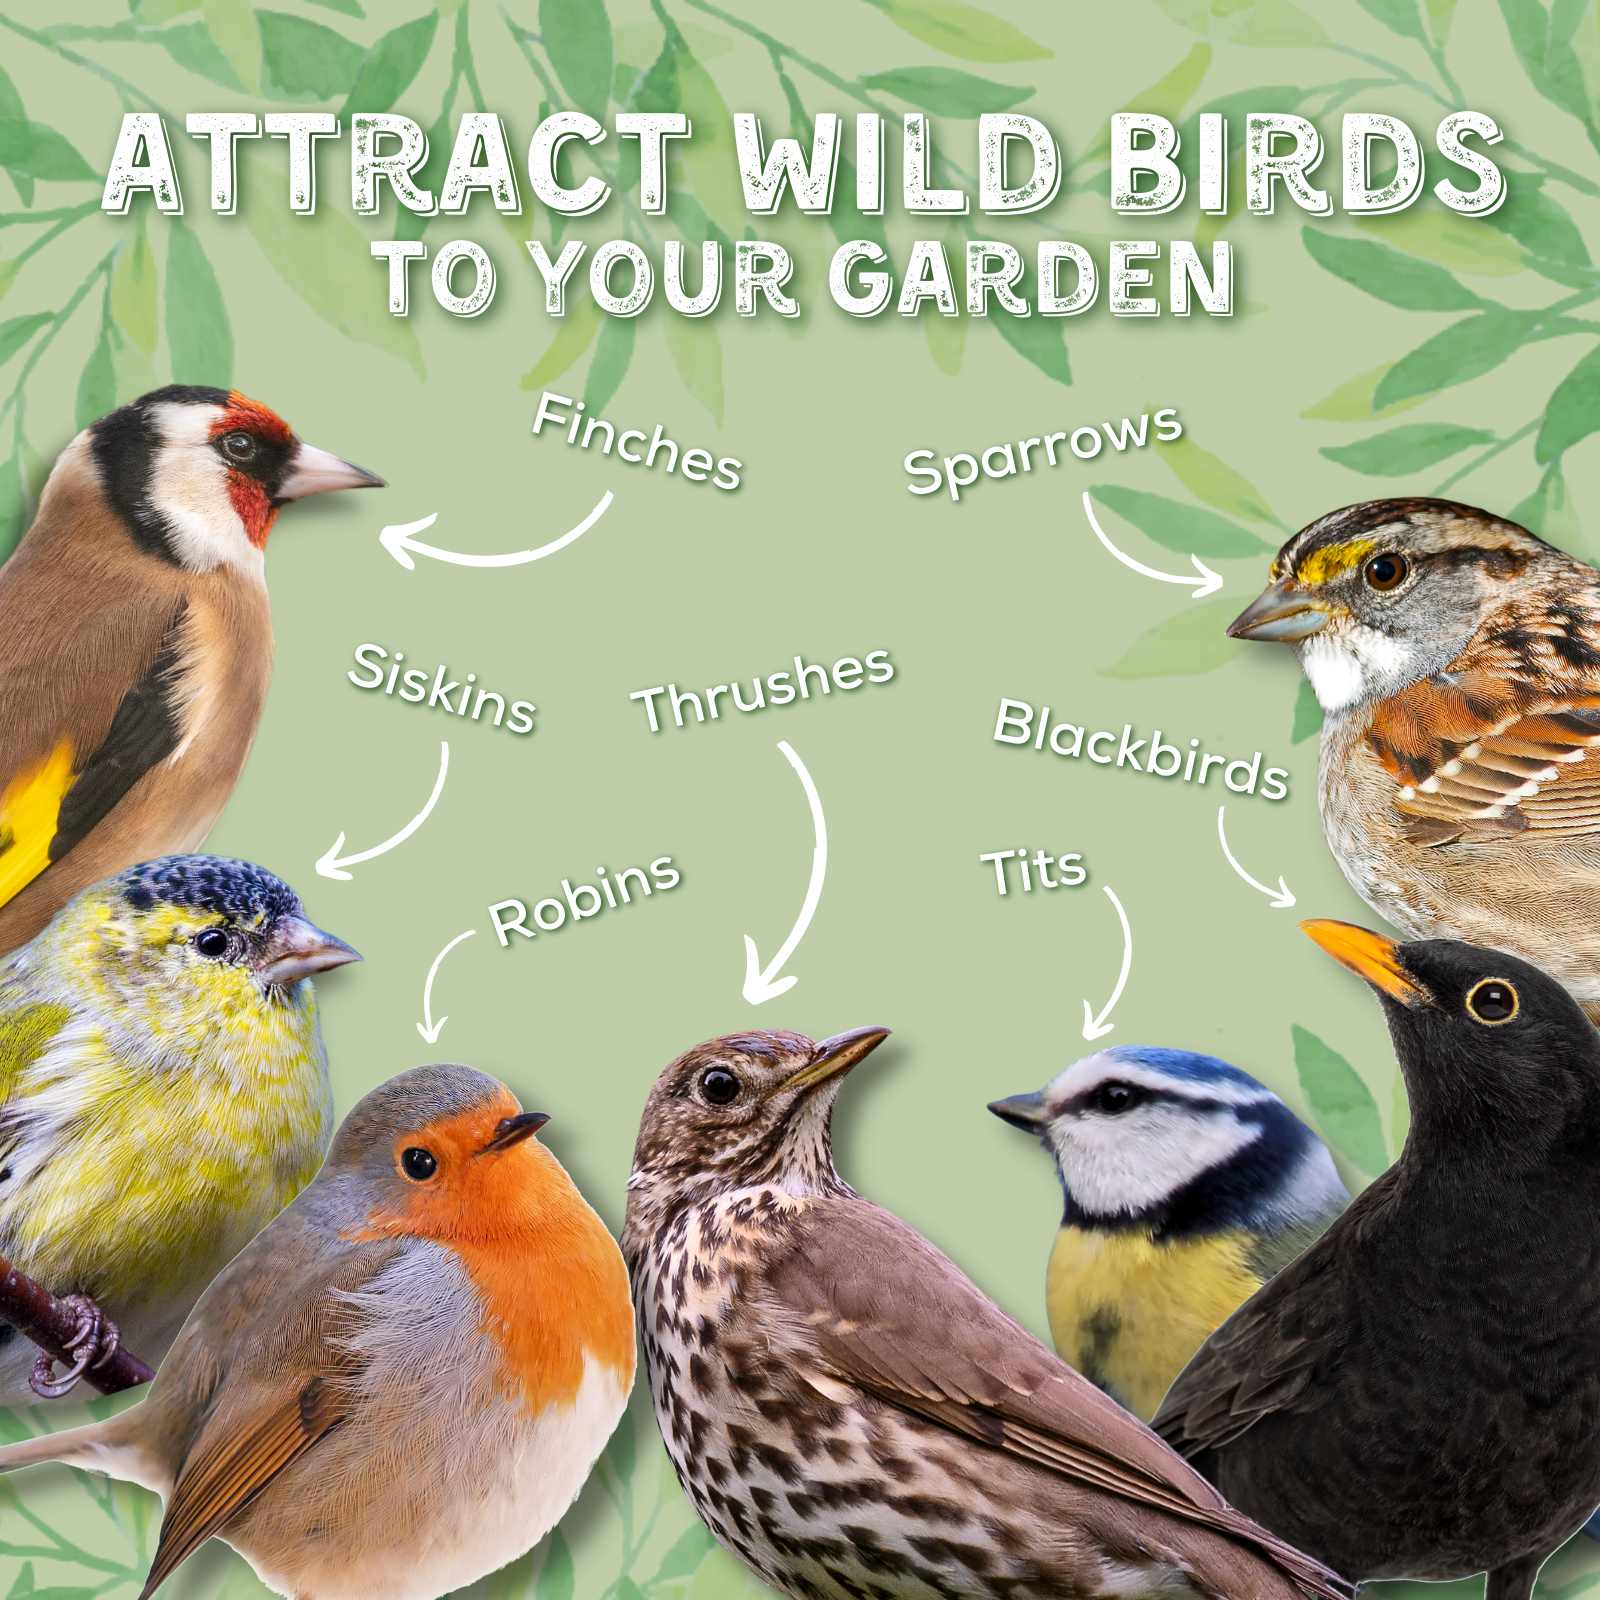 Attract wild birds to your garden - Finches, Sparrows, Siskins, Thrushes, Blackbirds, Robins, Tits.